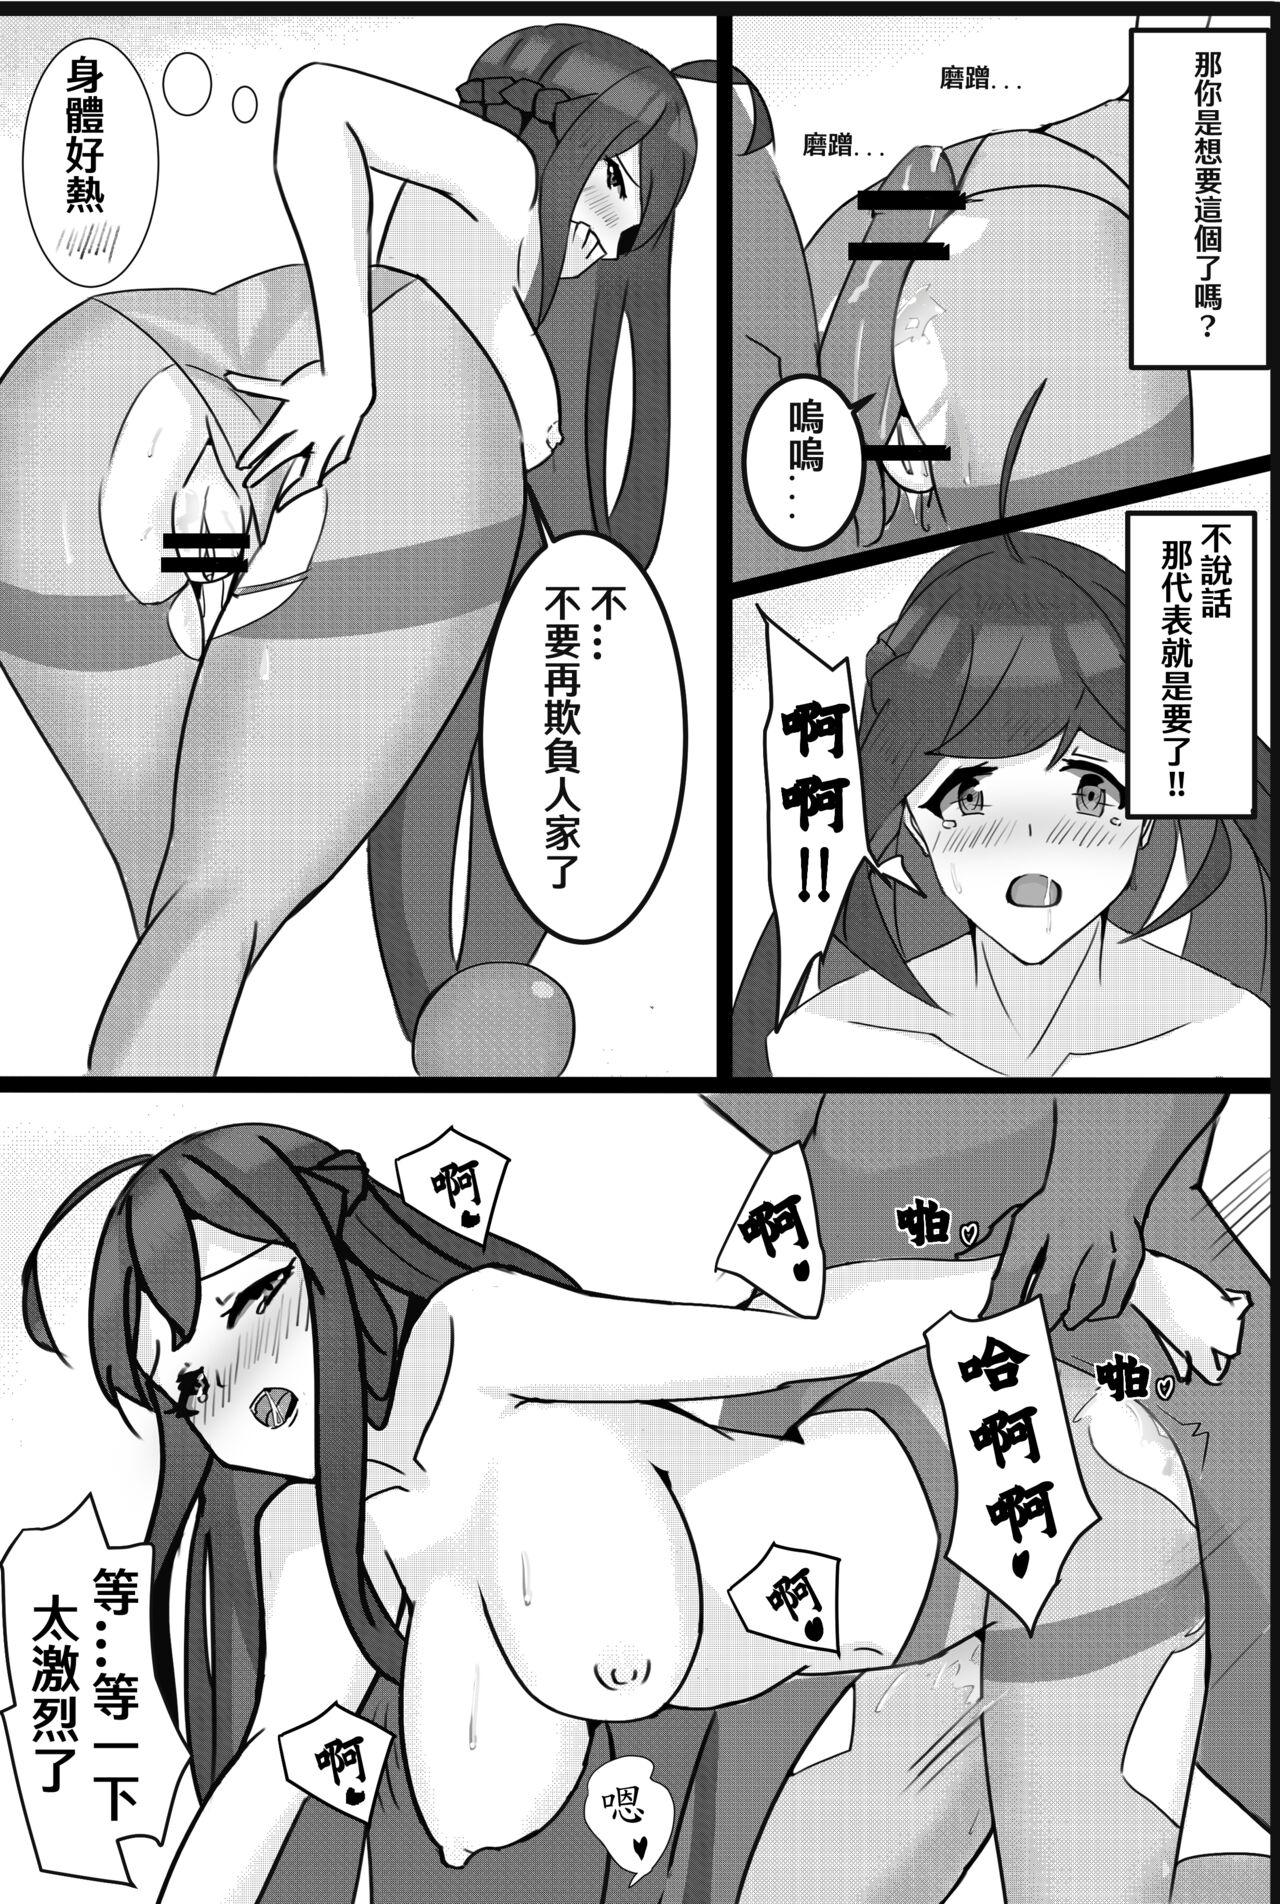 Indonesian 艾拉的本本 - Elsword Rough Fuck - Page 7